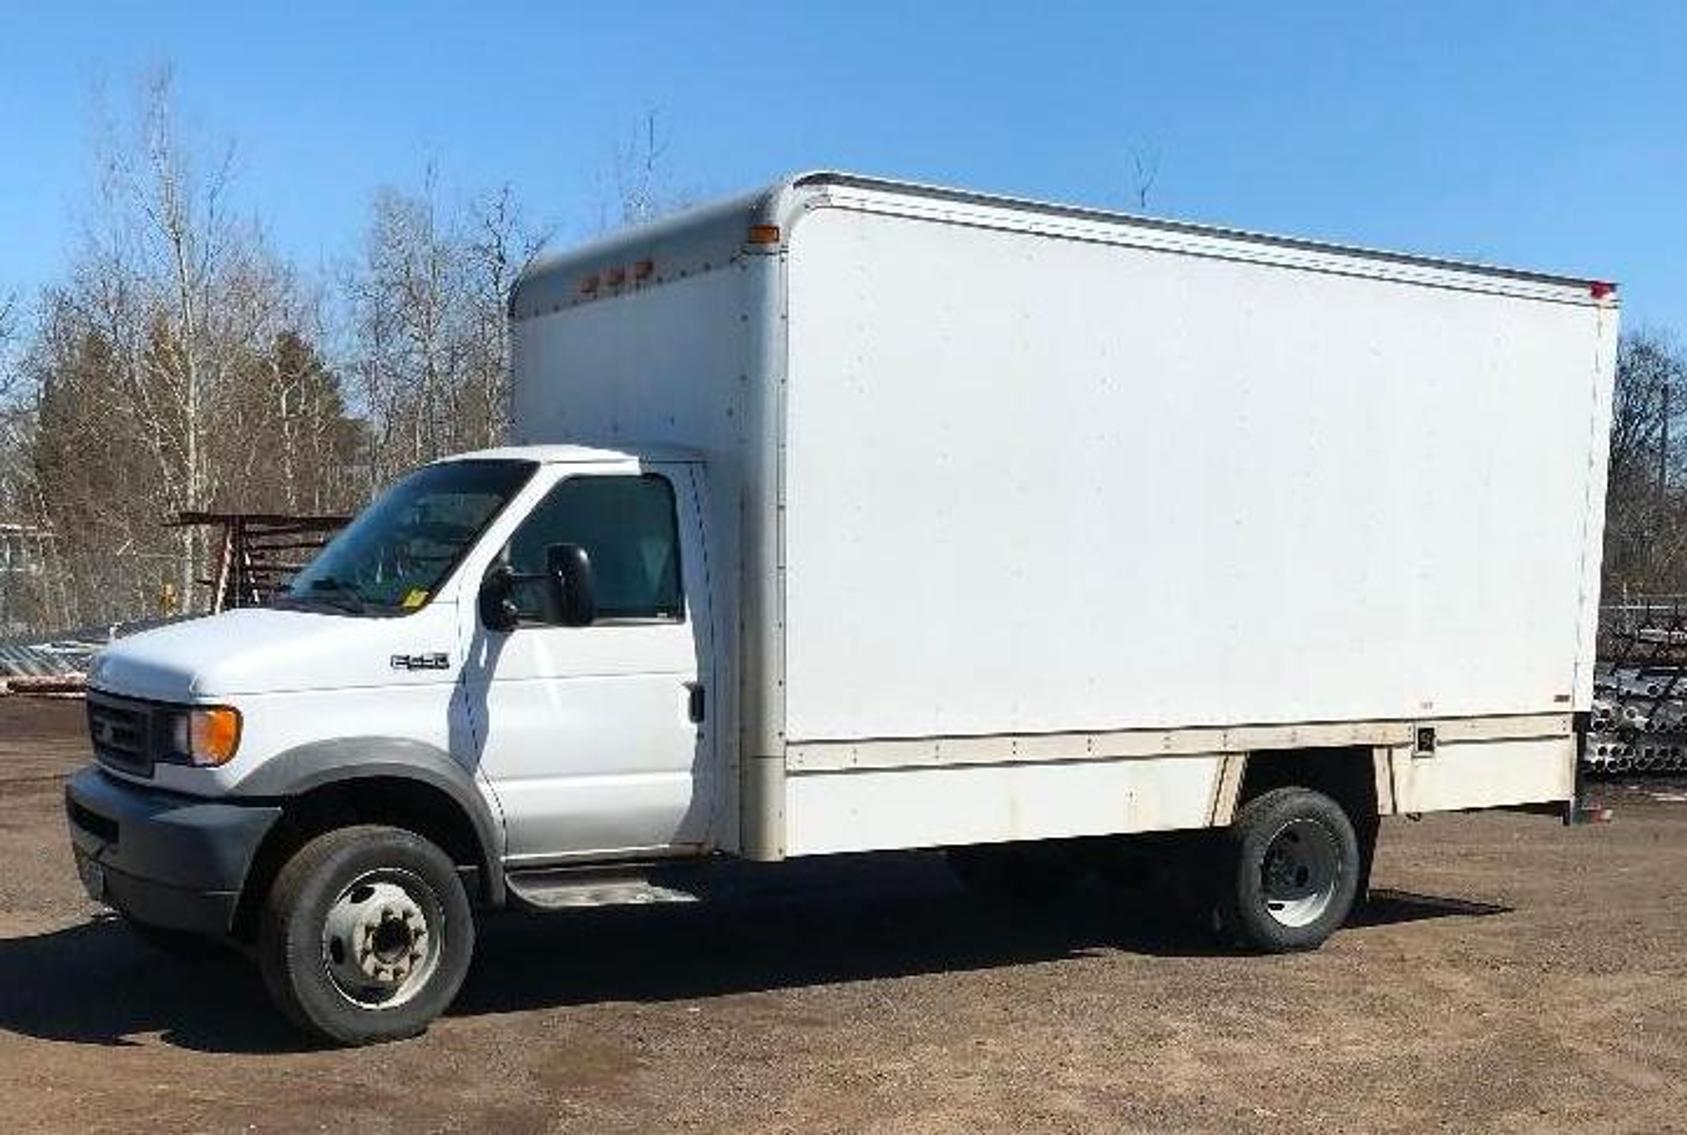 Excess Truck, Trailer, Fabrication, and Rigging Equipment